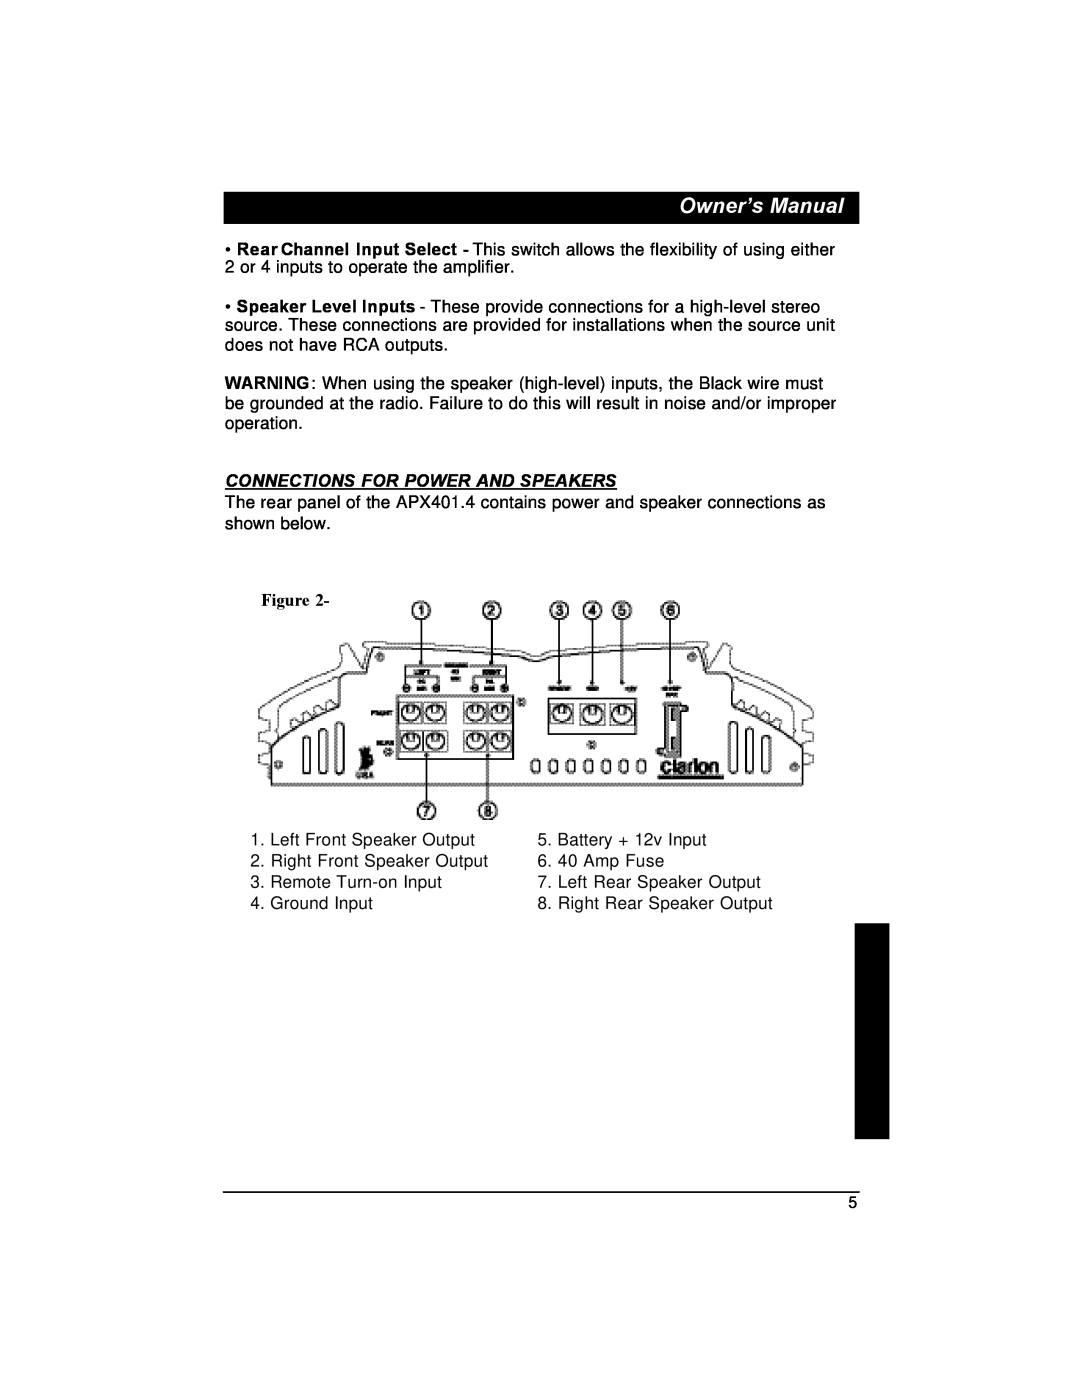 Clarion APX401.4 installation manual Connections For Power And Speakers 